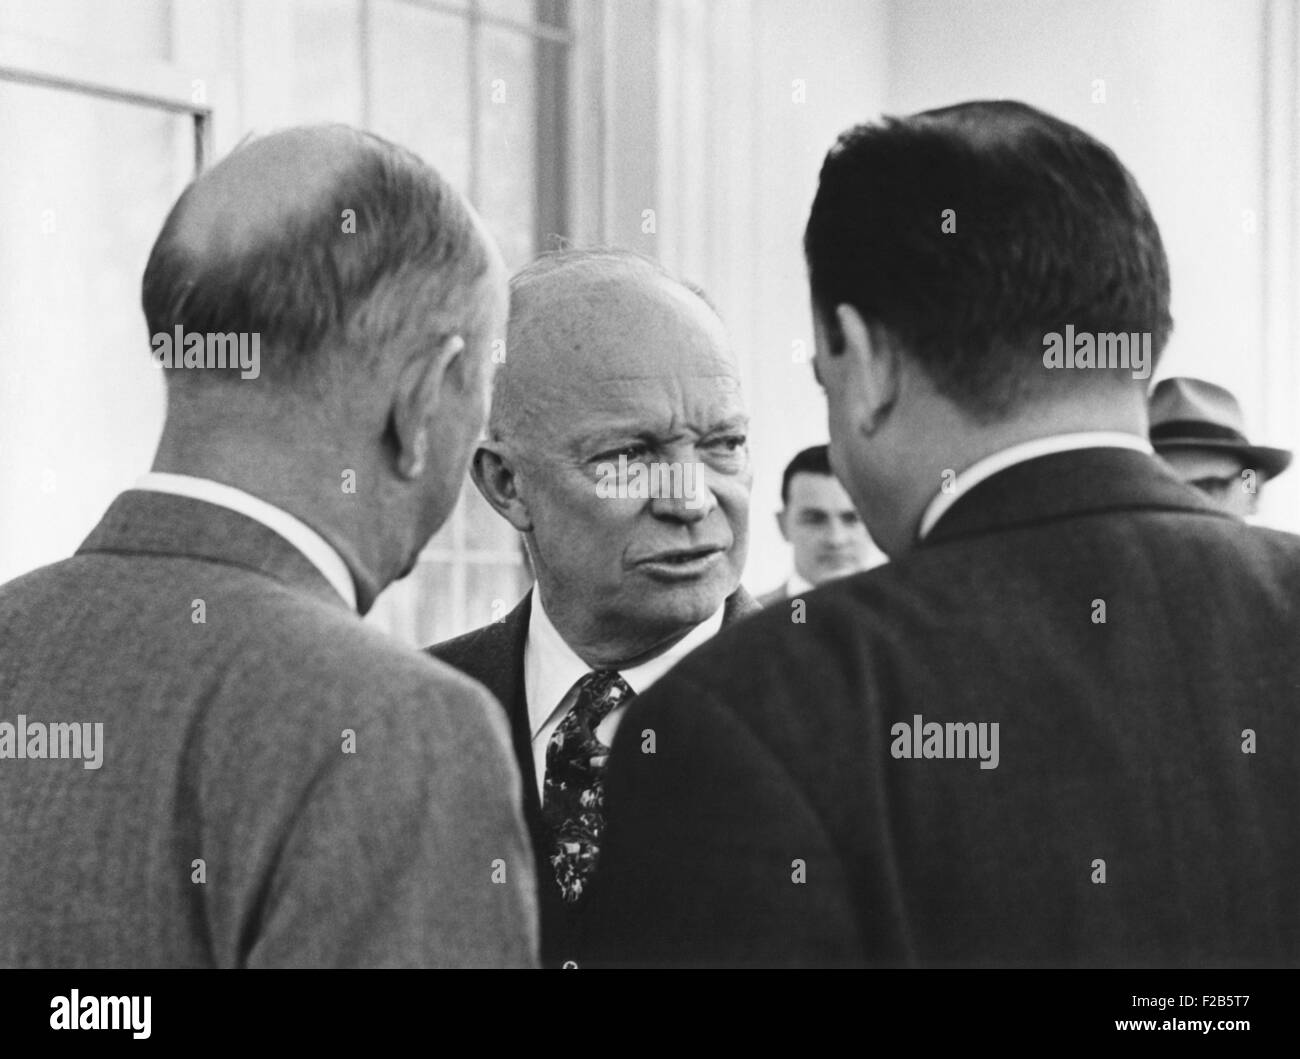 Candid portrait of President Eisenhower in conversation with unidentified men on March 31, 1955. - (BSLOC 2014 16 61) Stock Photo